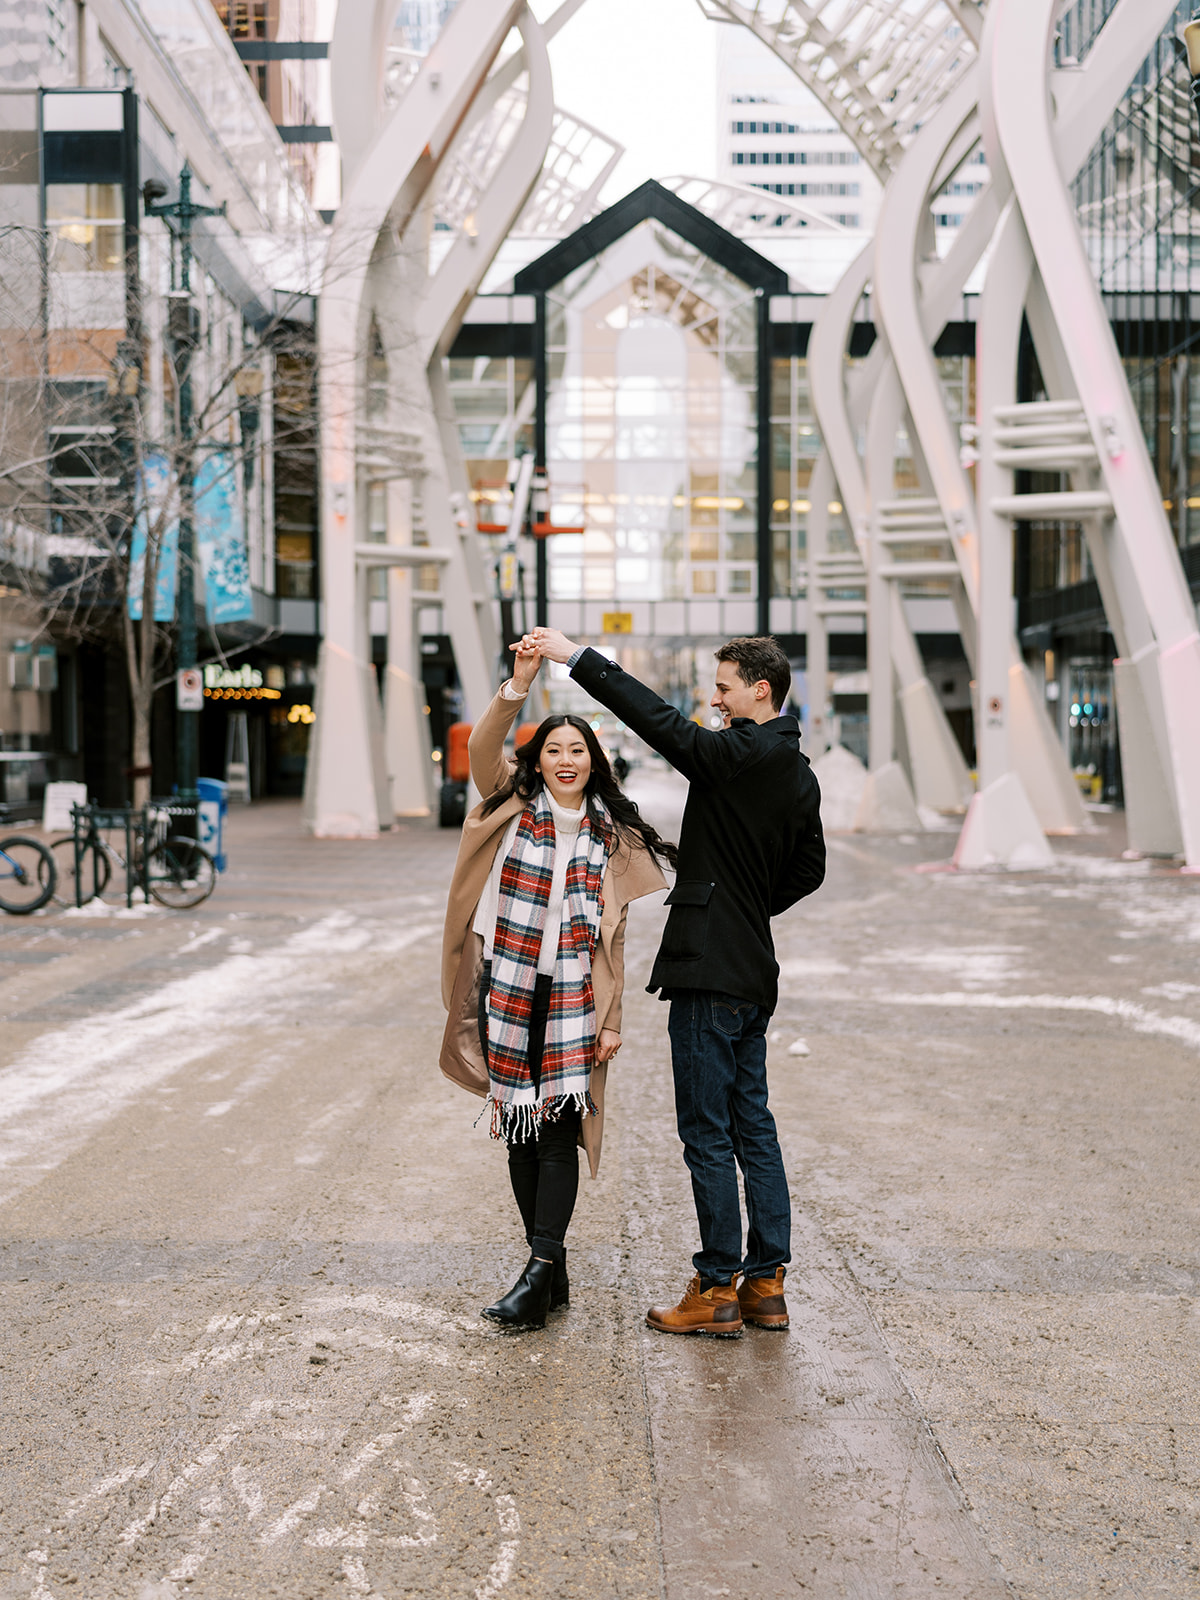 Cute Couples Engagement Session for Winter and Christmas in Downtown Calgary